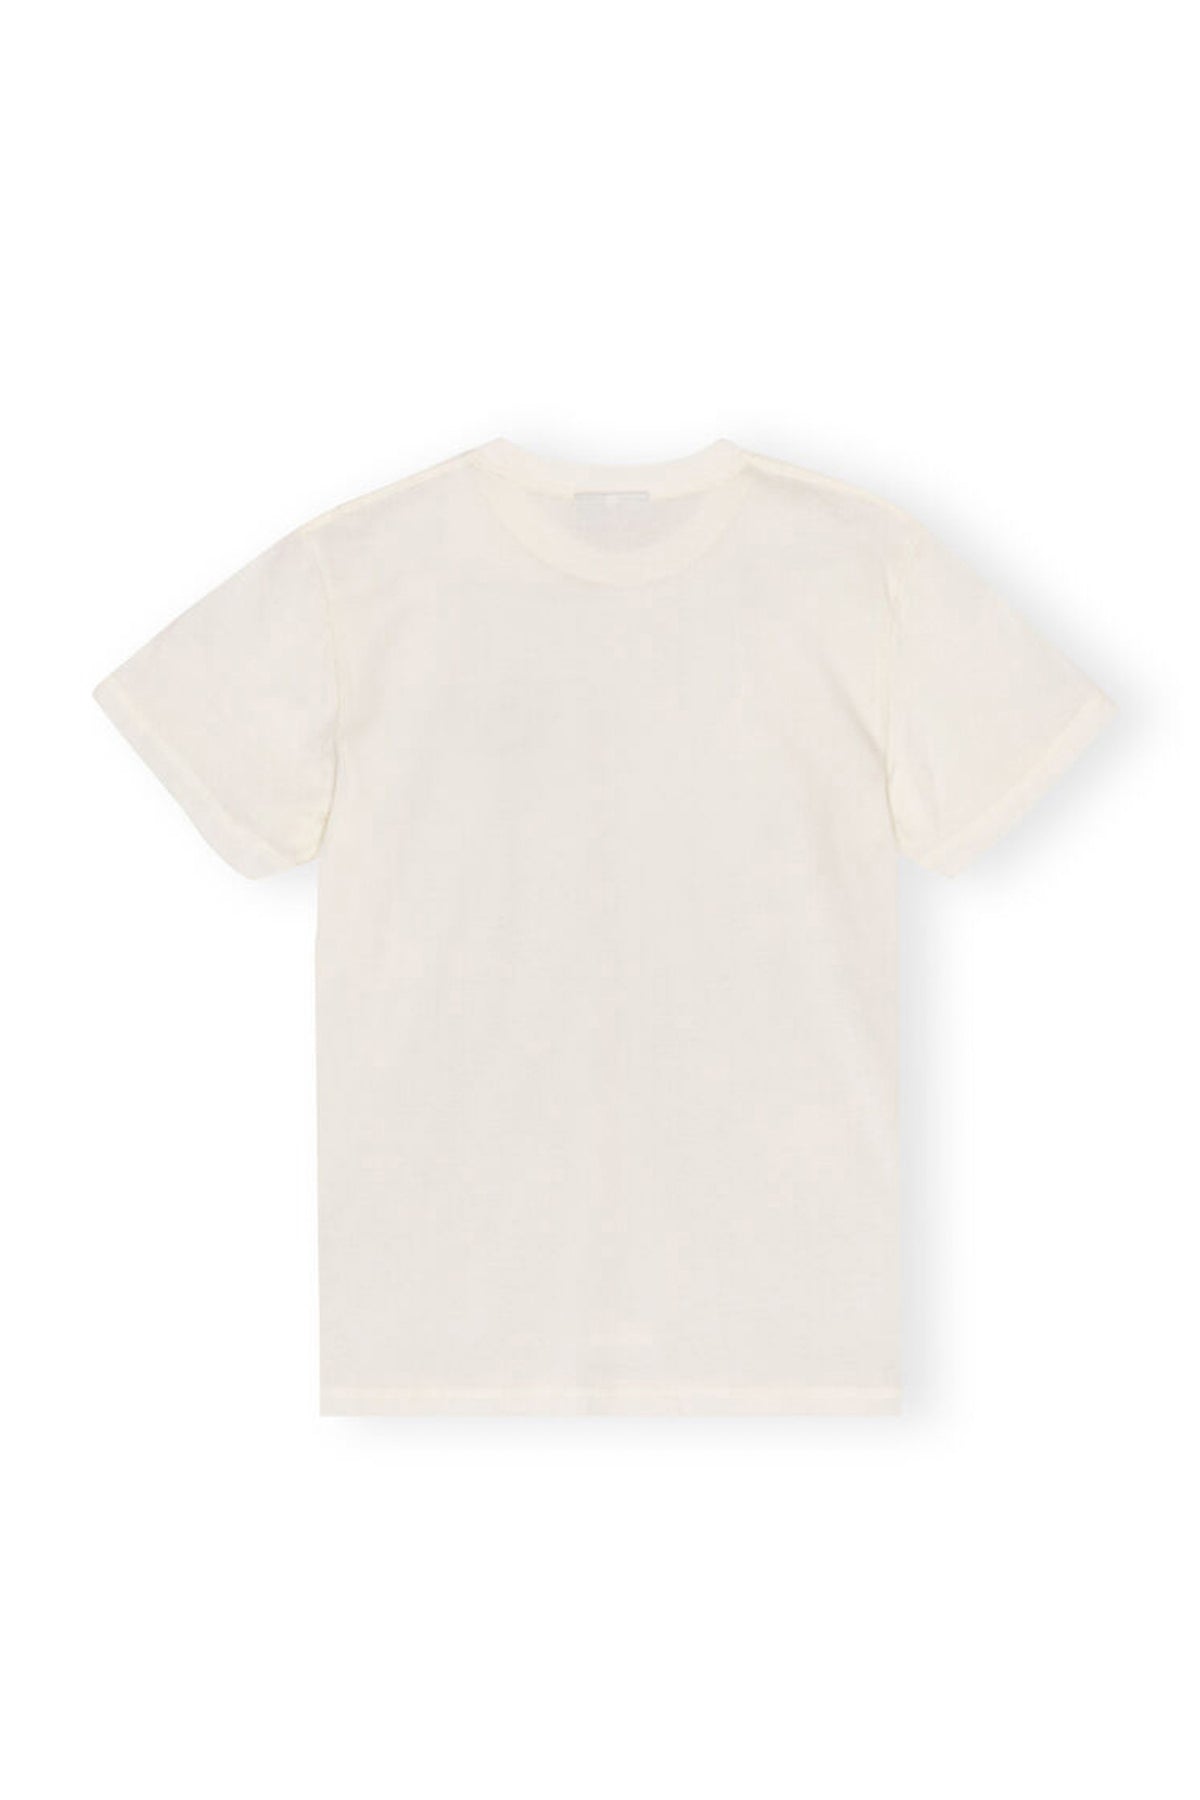 THIN JERSEY LOVECLUB RELAXED T-SHIRT / WHT